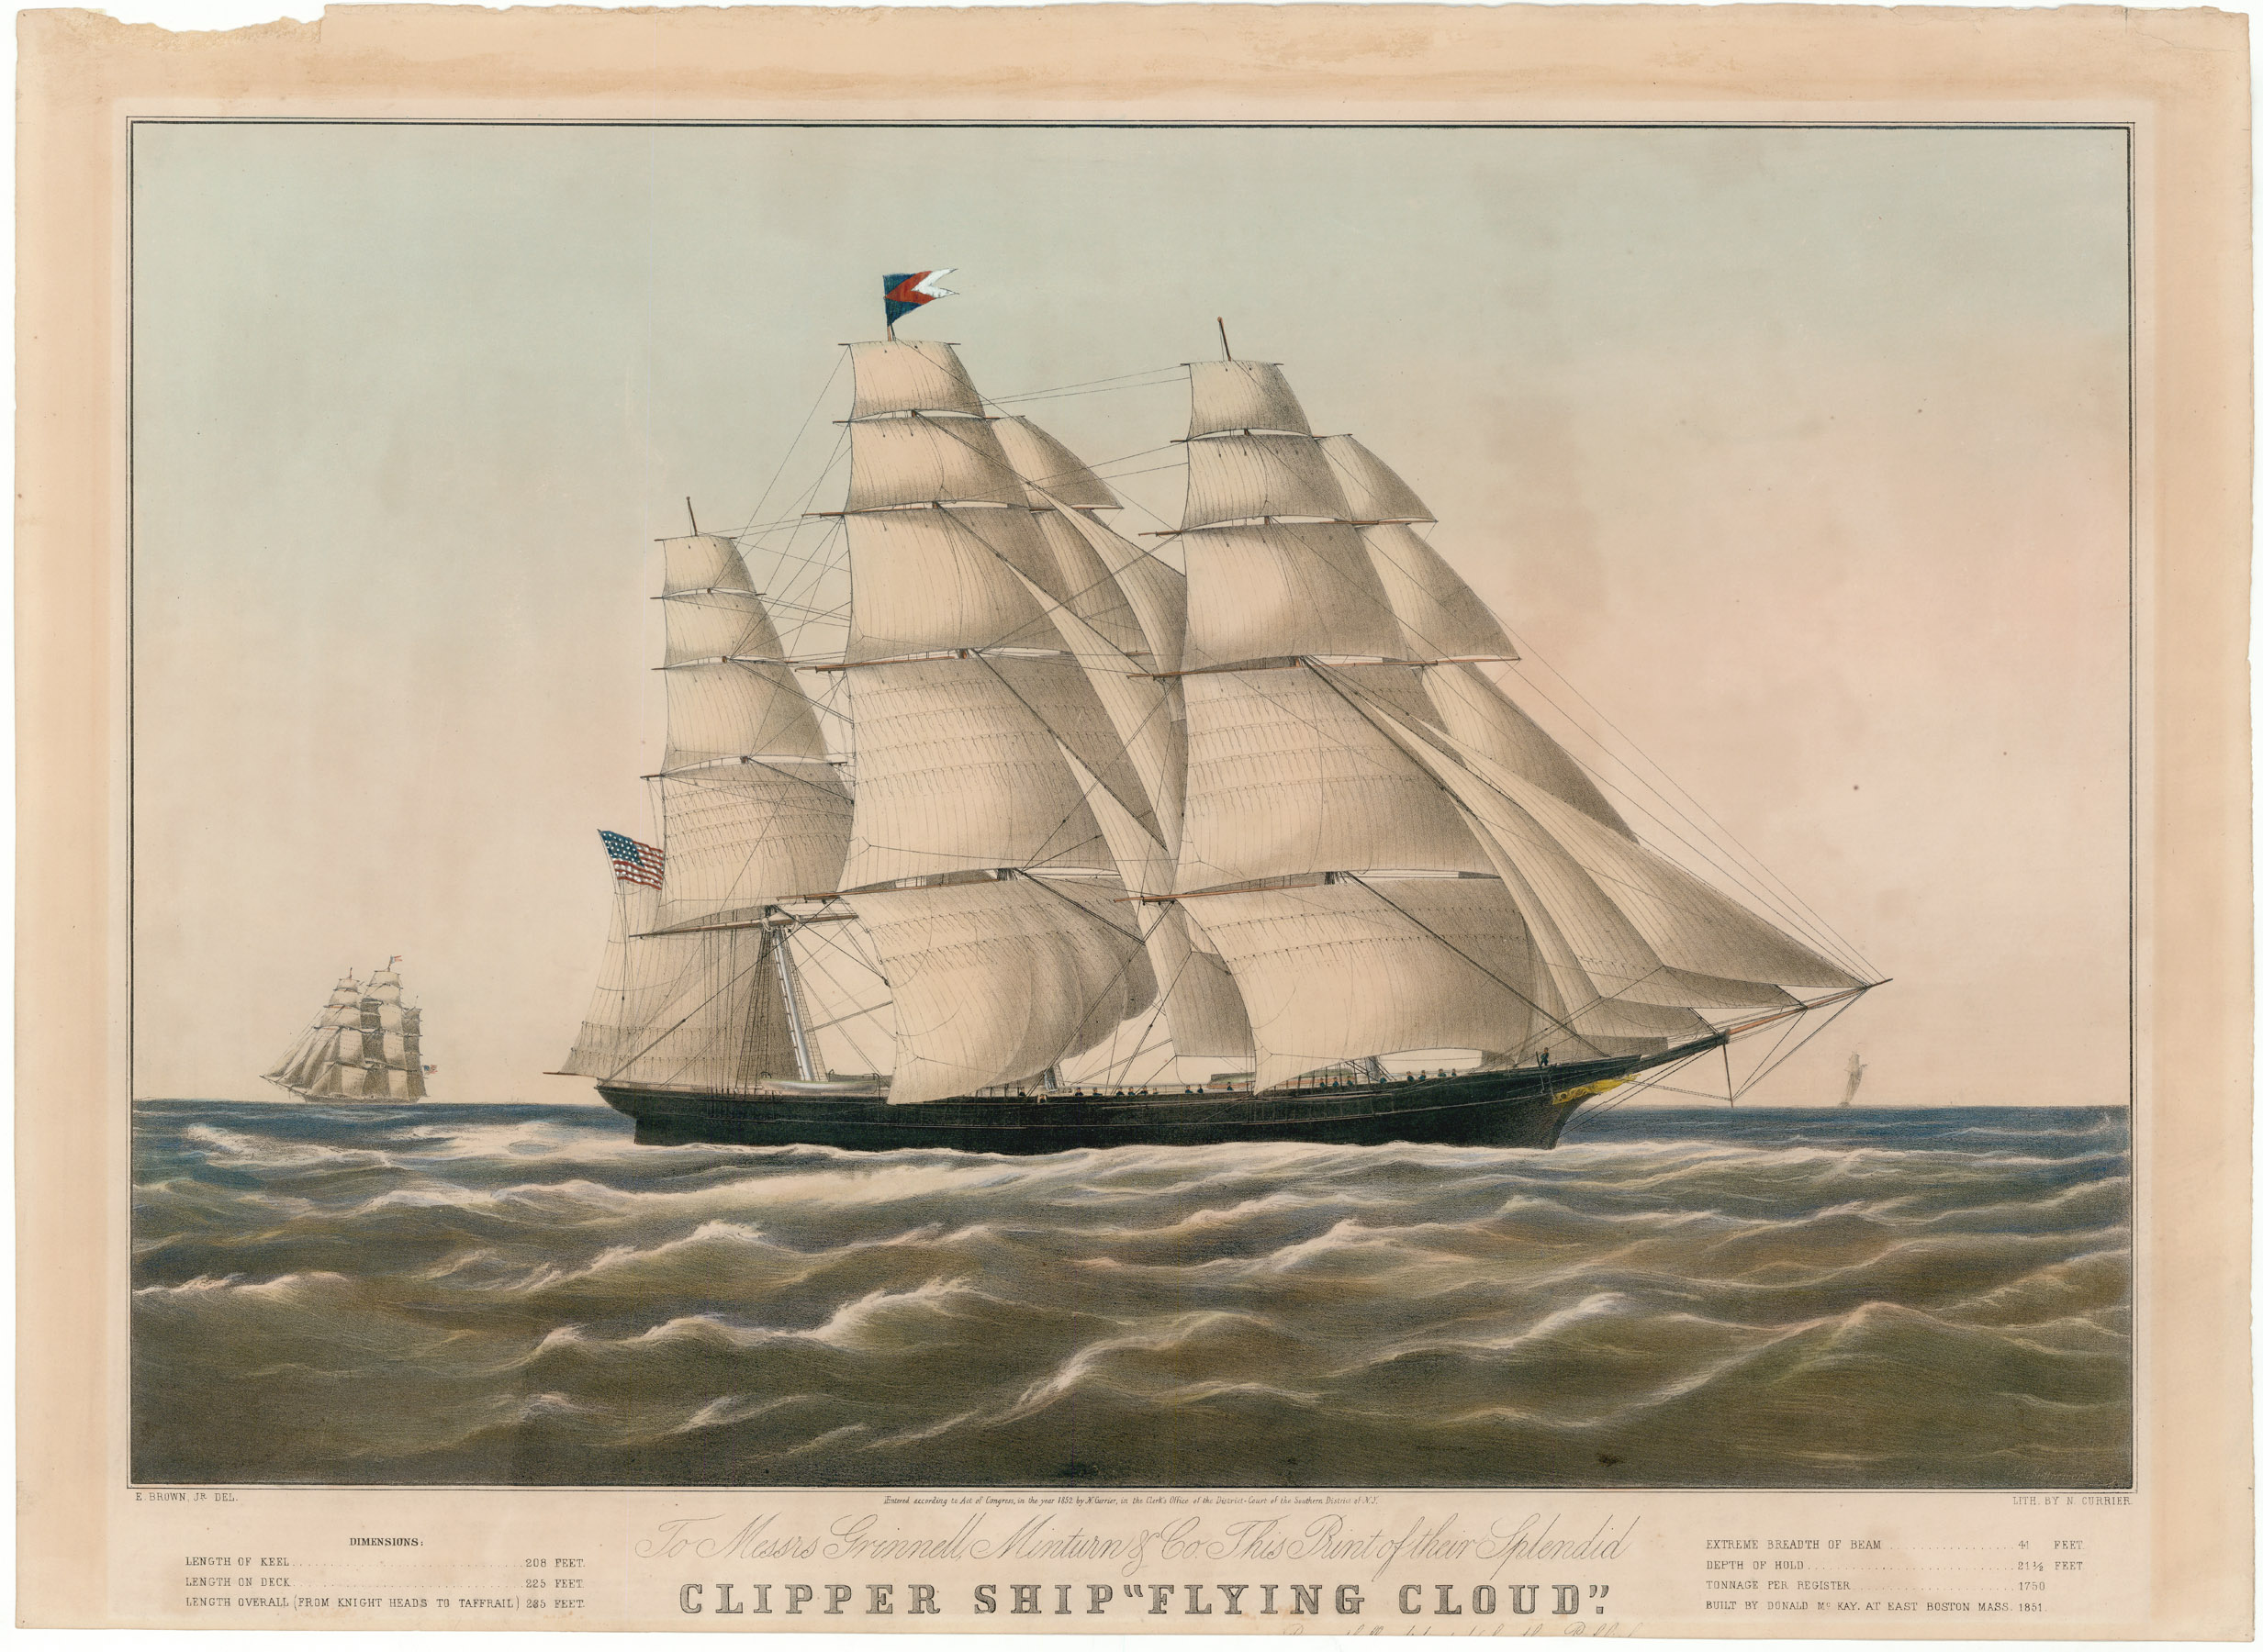 To Messrs. Grinnell Minturn & Co.  This Print of their splendid : Clipper Ship "Flying Cloud" : is Respectfully dedicated by the Publisher.